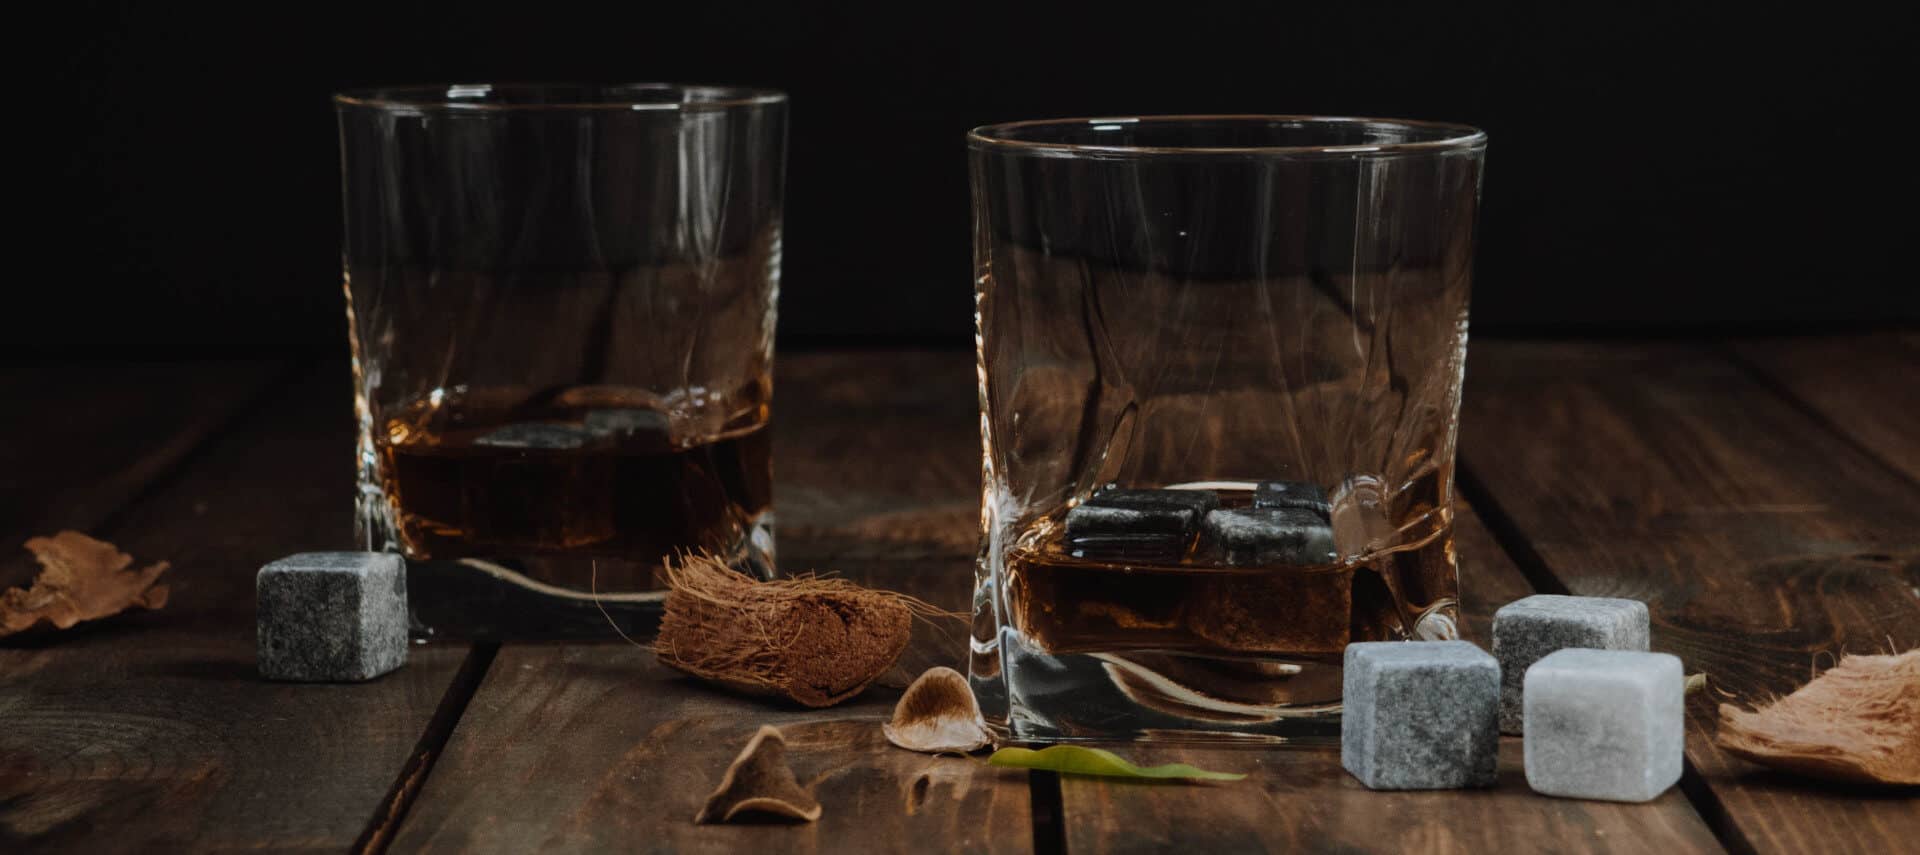 Two rocks glasses with golden bourbon whiskey on a wooden table covered in natural materials and four grey whiskey stones.